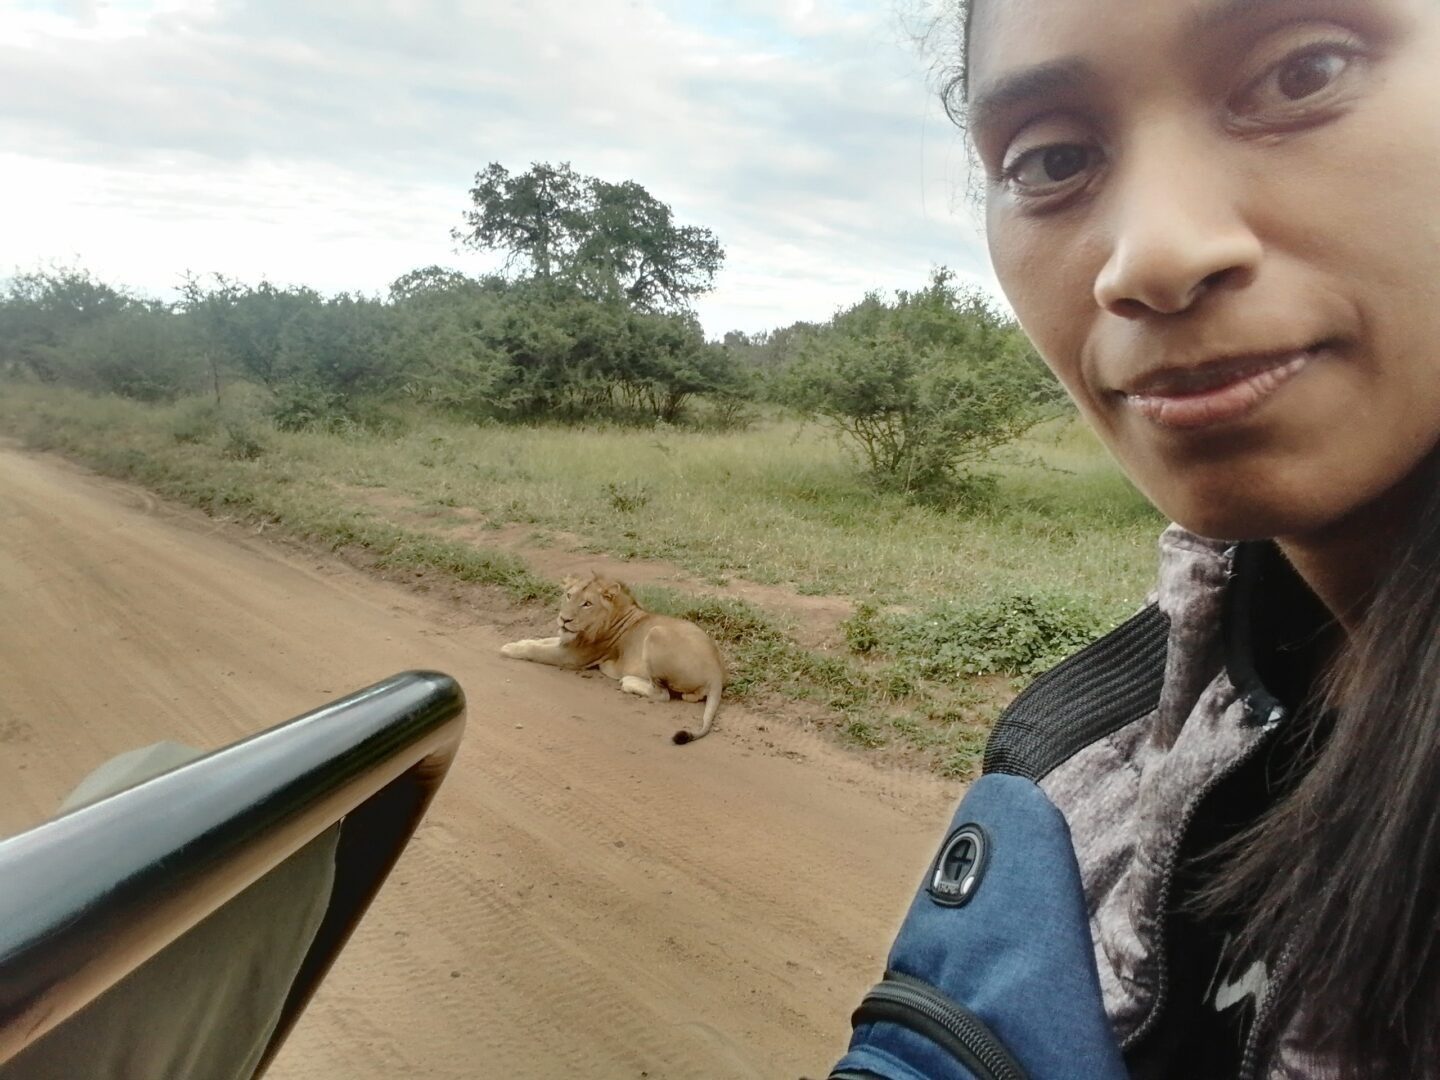 A young person taking a selfie with an animal in the background.